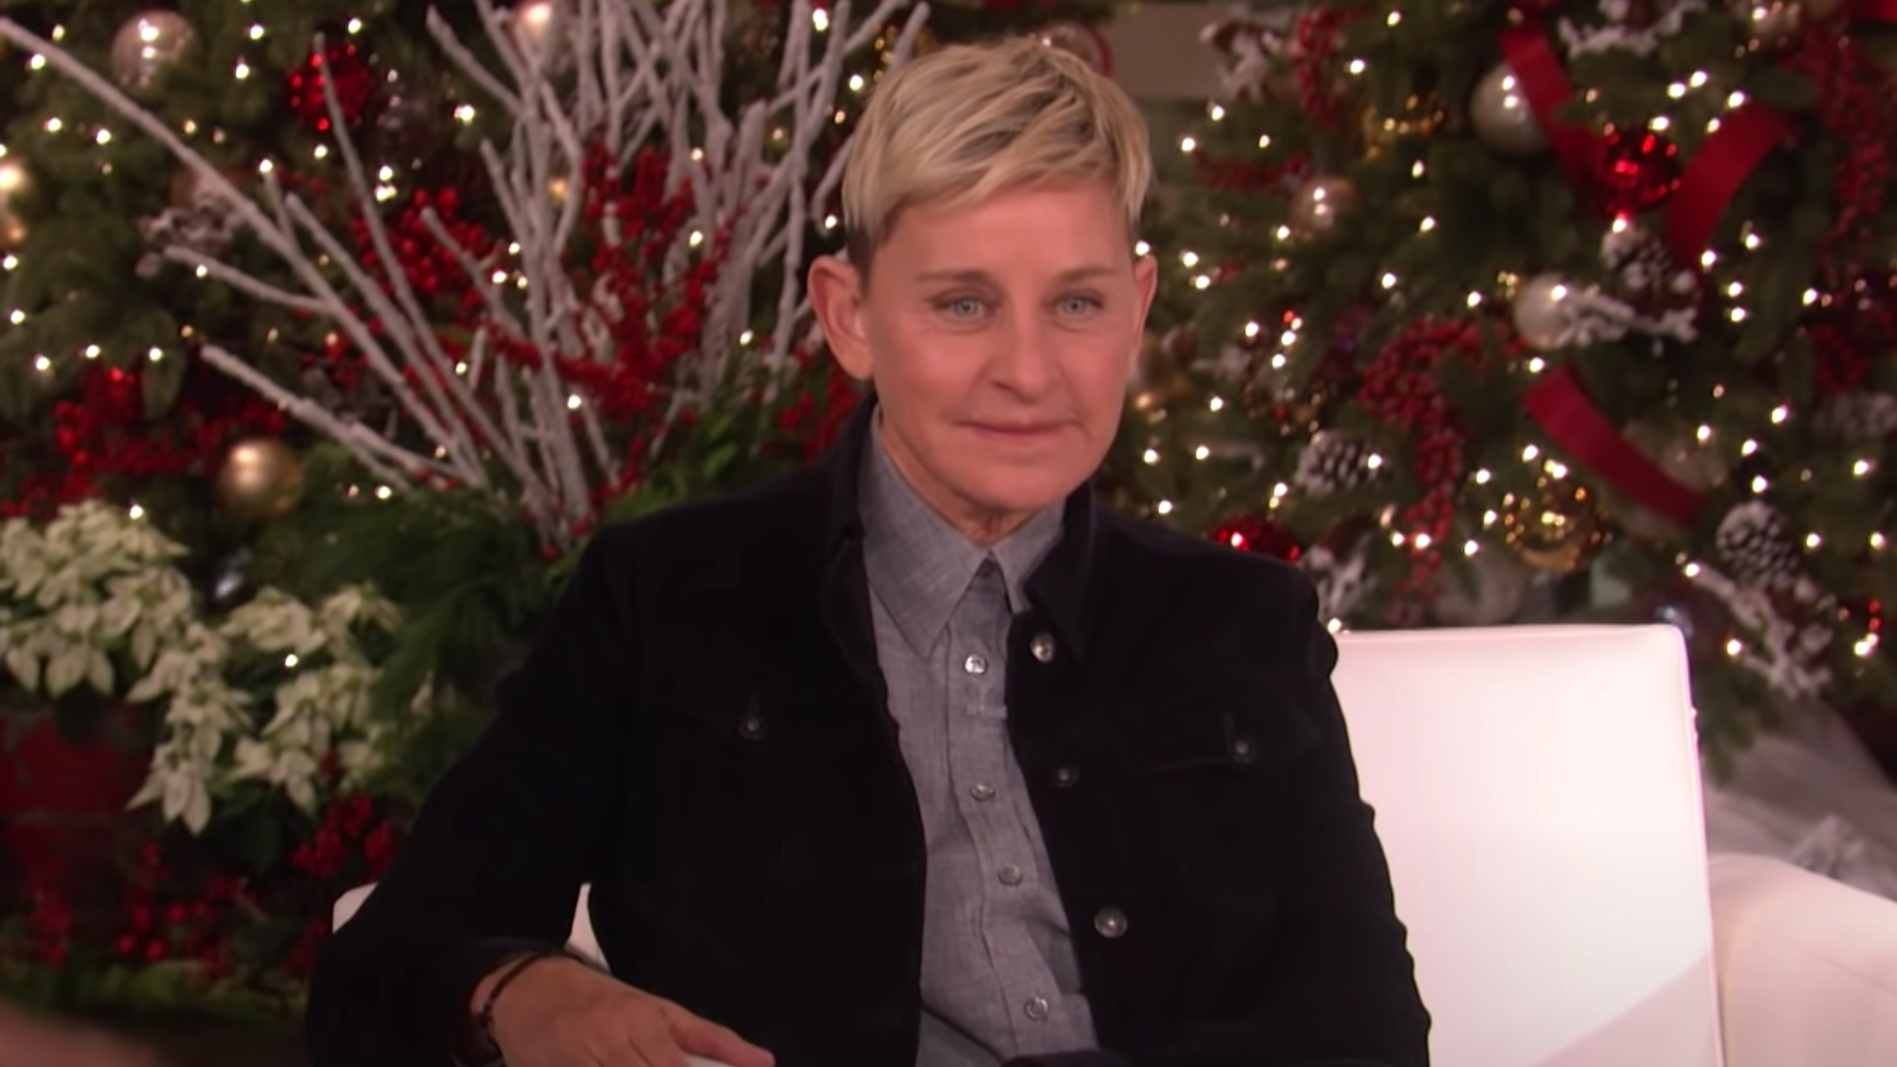 The Ellen Degeneres Show will end with its next season